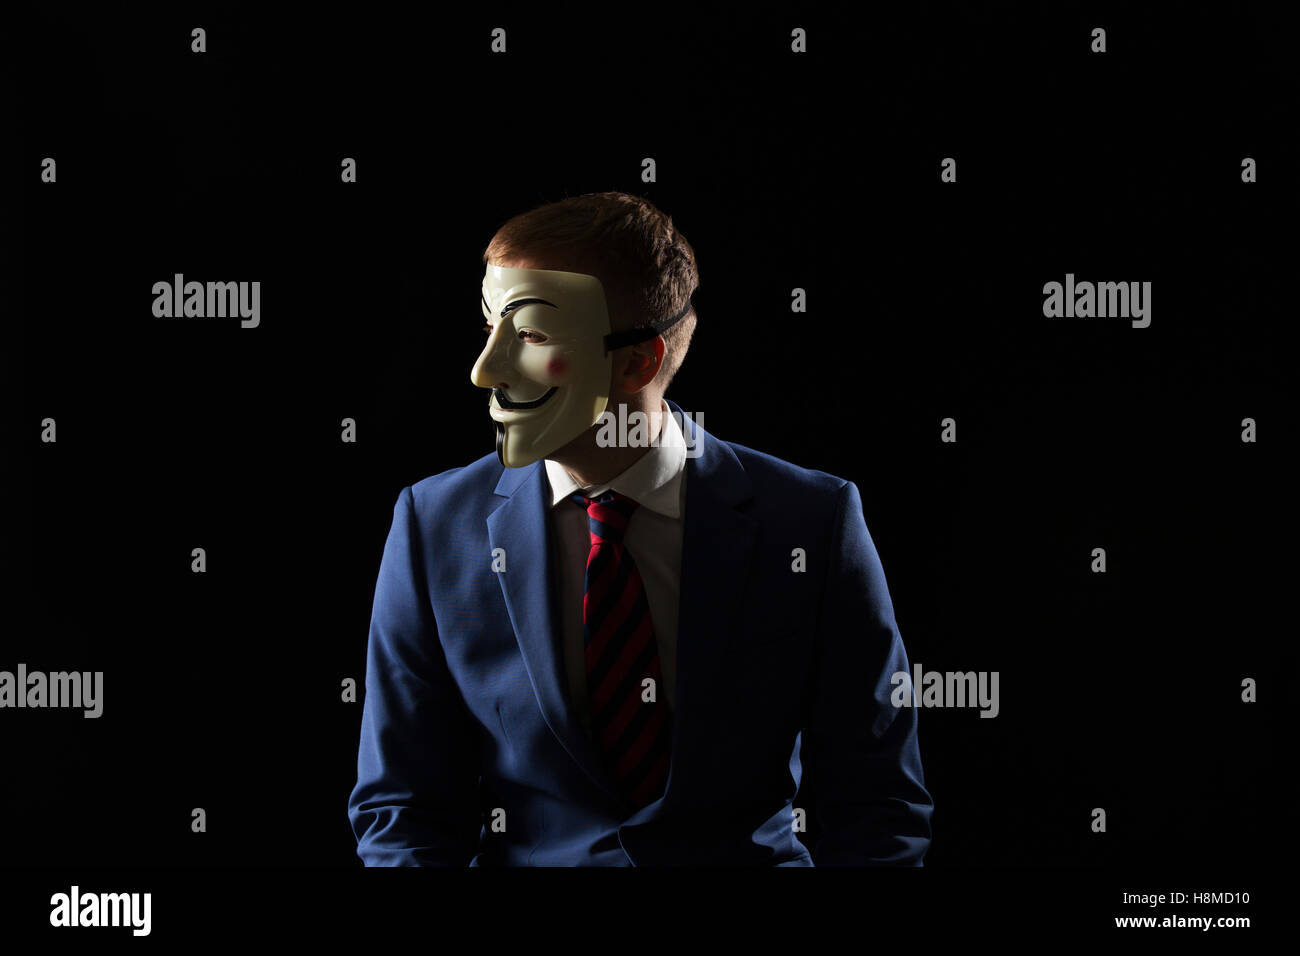 Business man under the mask disguise being  Anonymous and implying that he is a hacker or anarchist Stock Photo